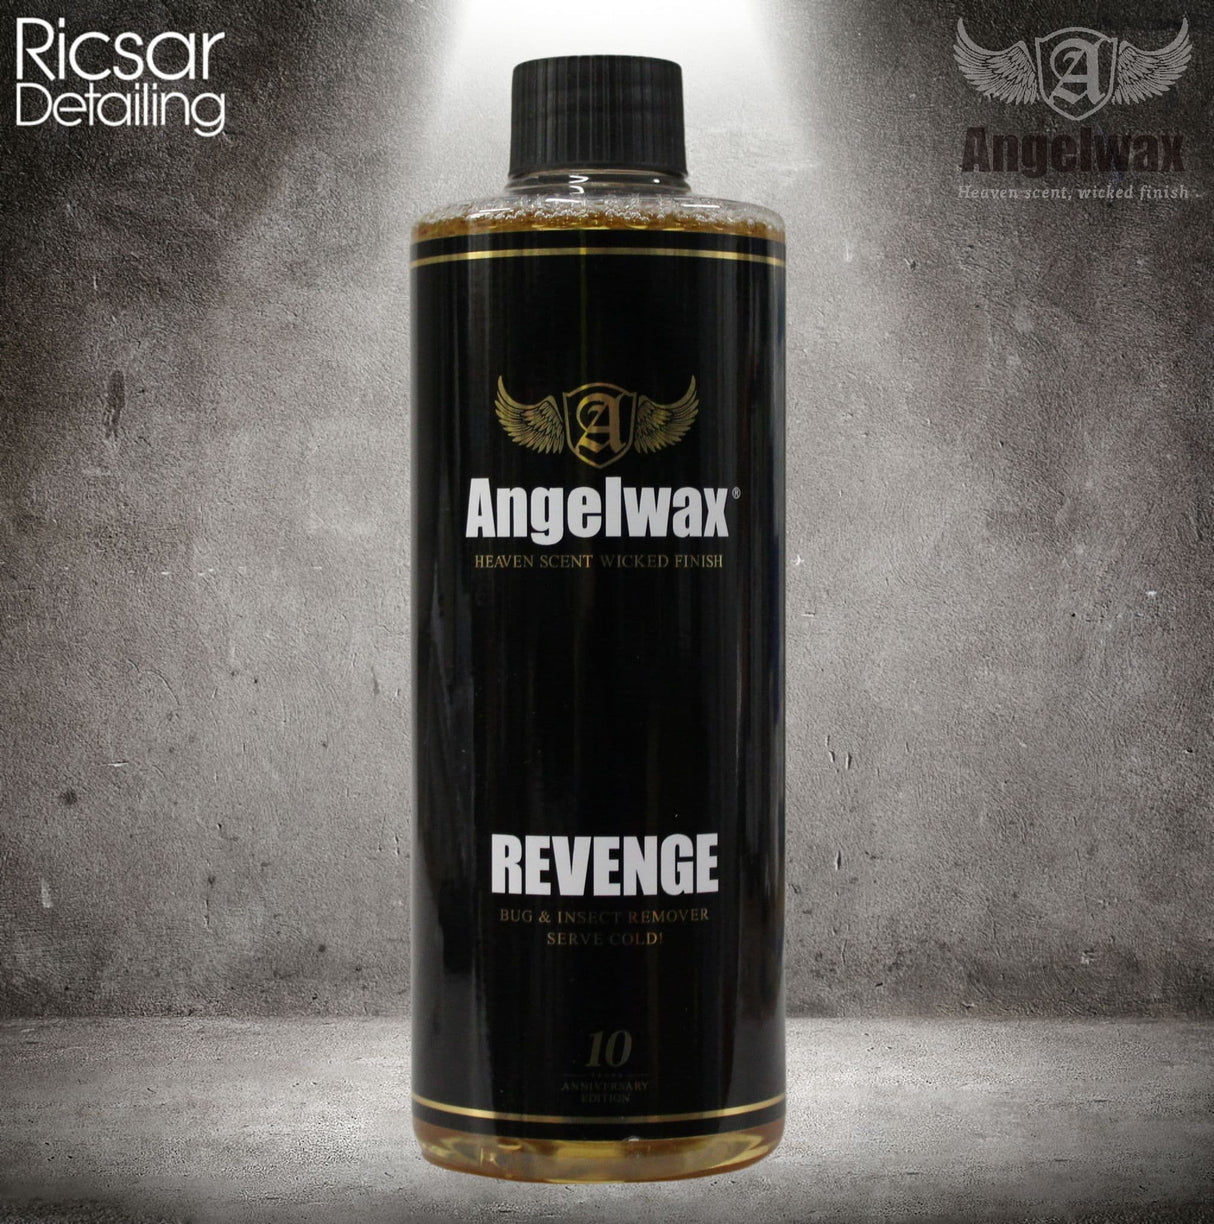 Angelwax Revenge - Wax Safe Bug & Insect Remover